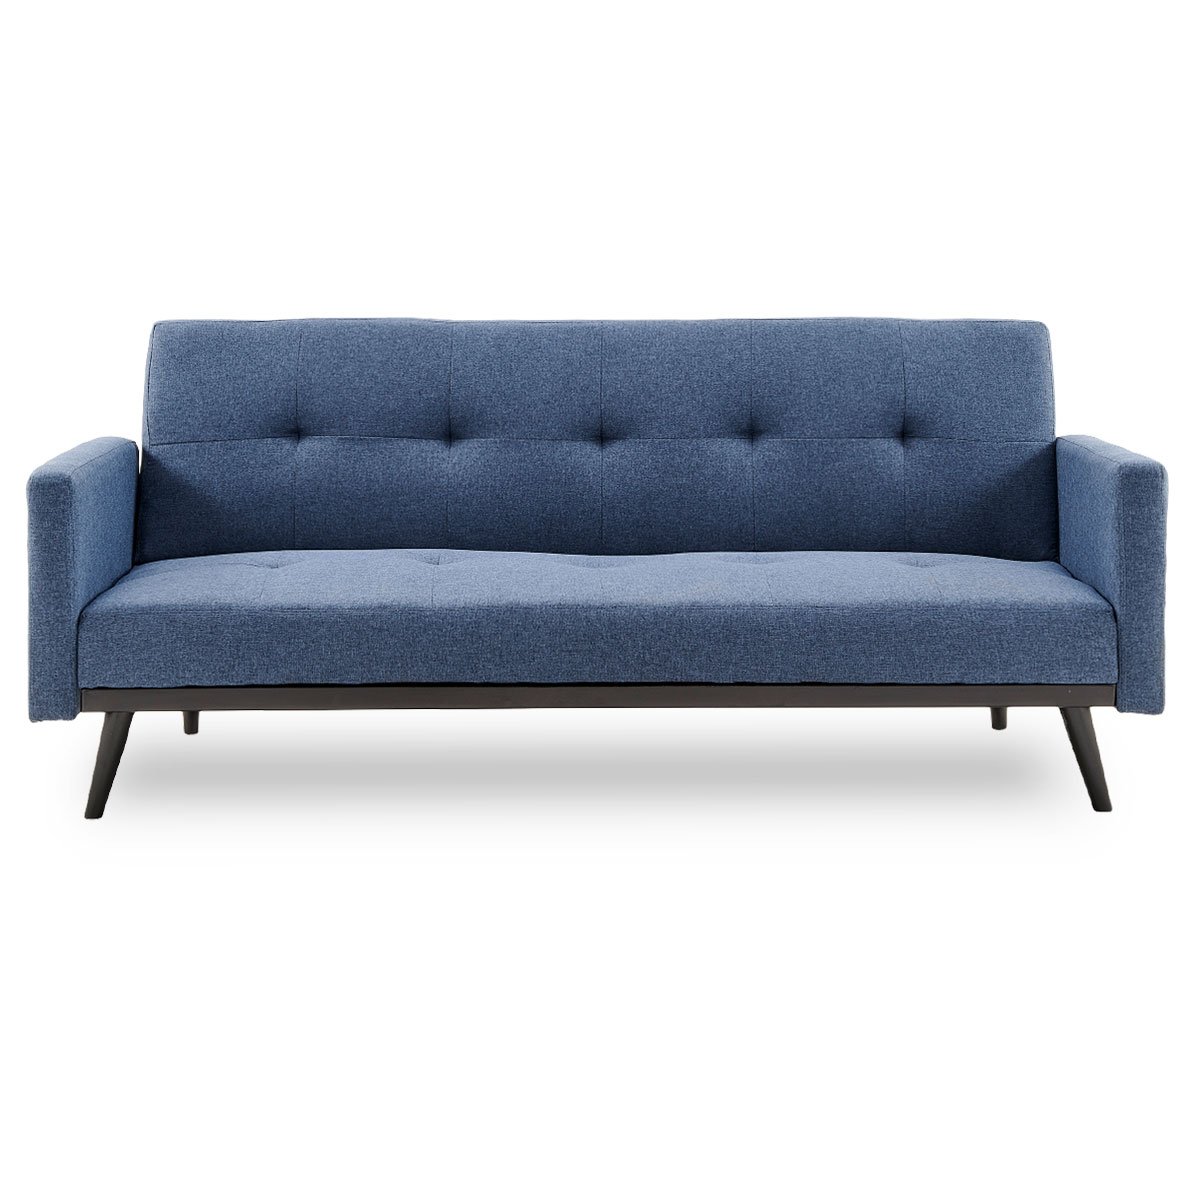 Sarantino Tufted Faux Linen 3-Seater Sofa Bed with Armrests - Blue 2